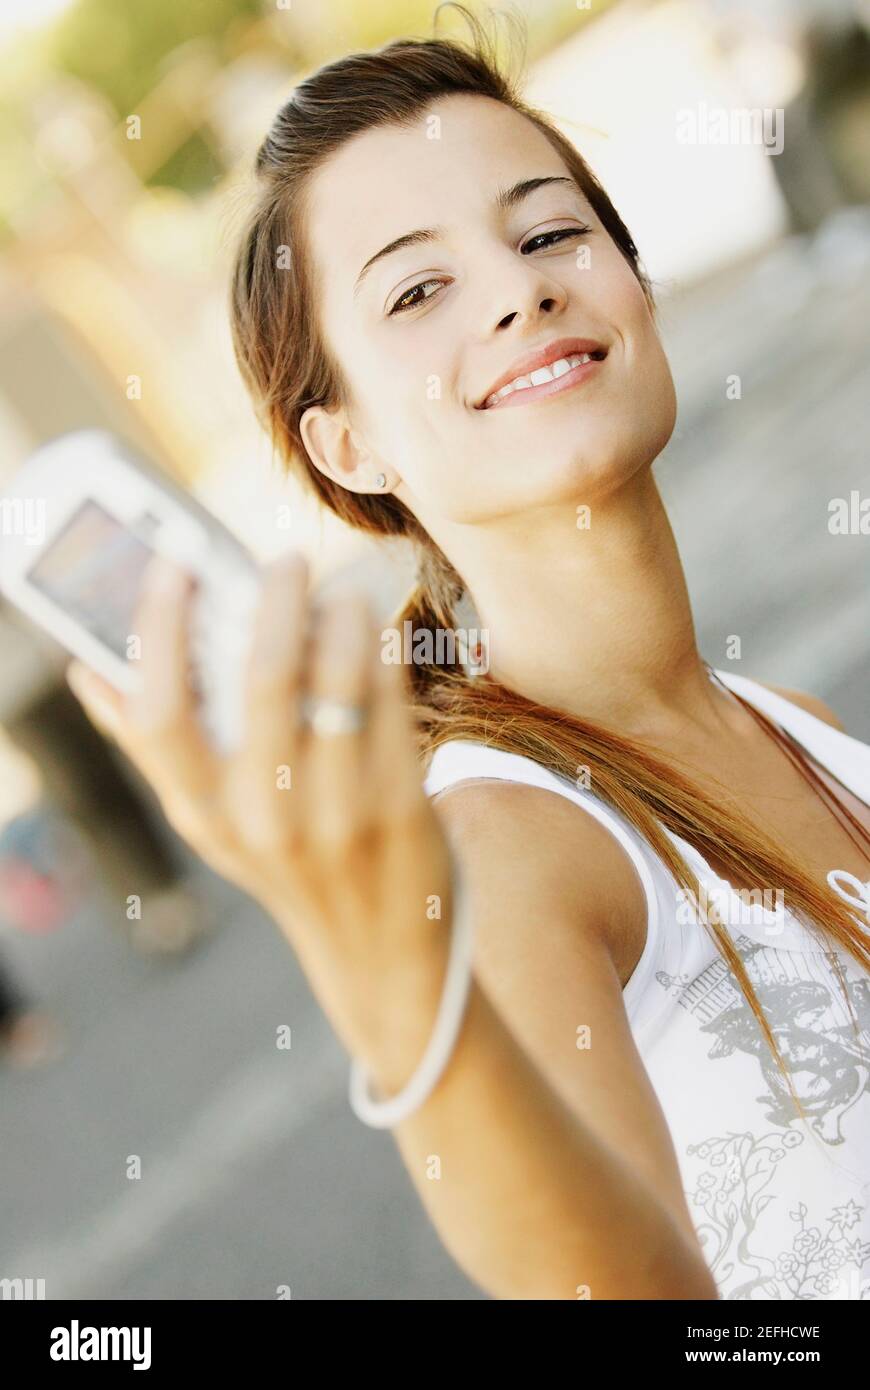 Close up of a young woman taking a photograph of herself Stock Photo